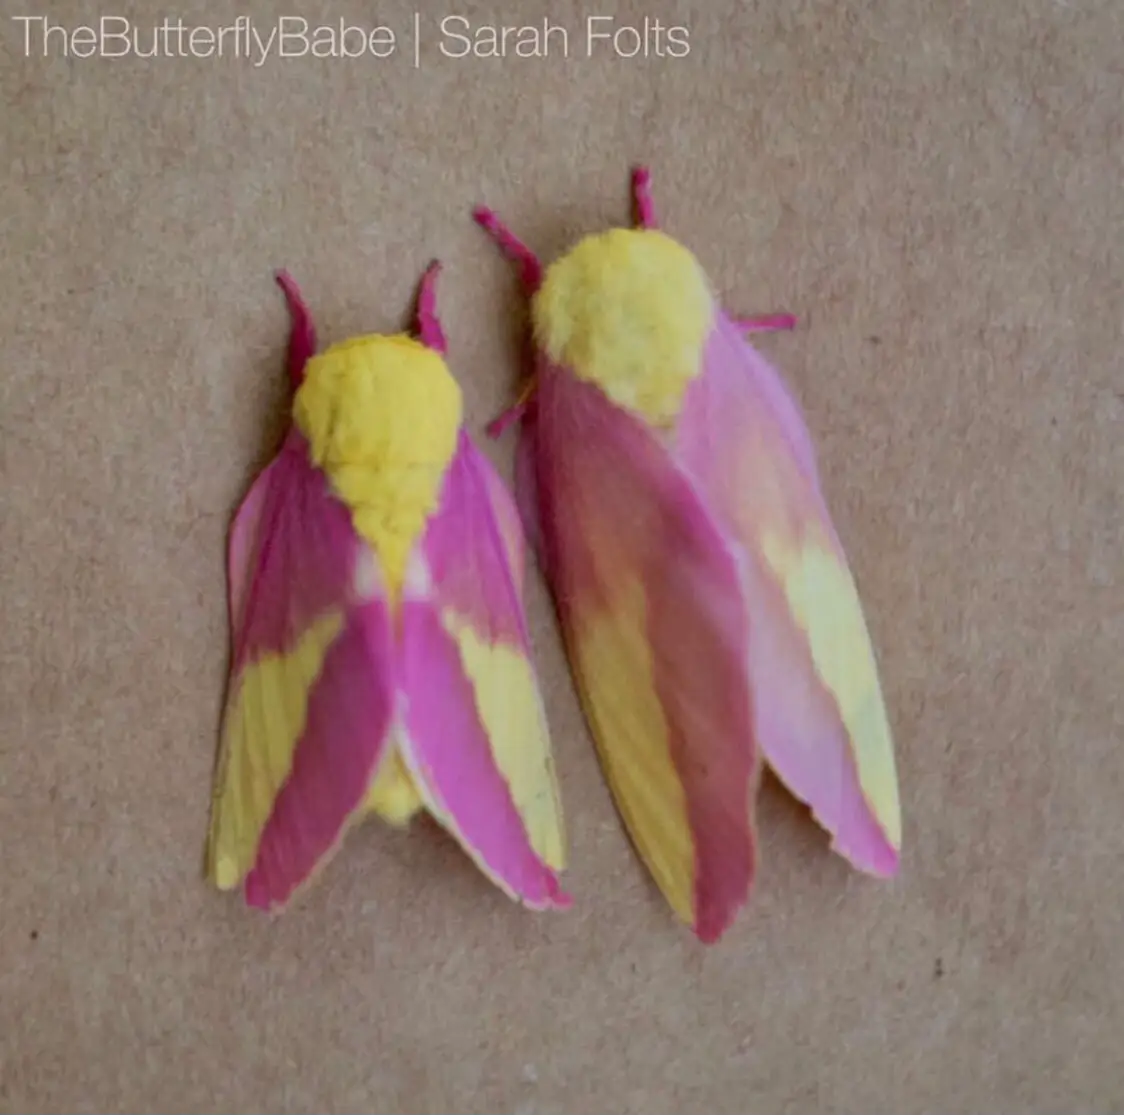 Rosy maple moths are my new fav type of moth